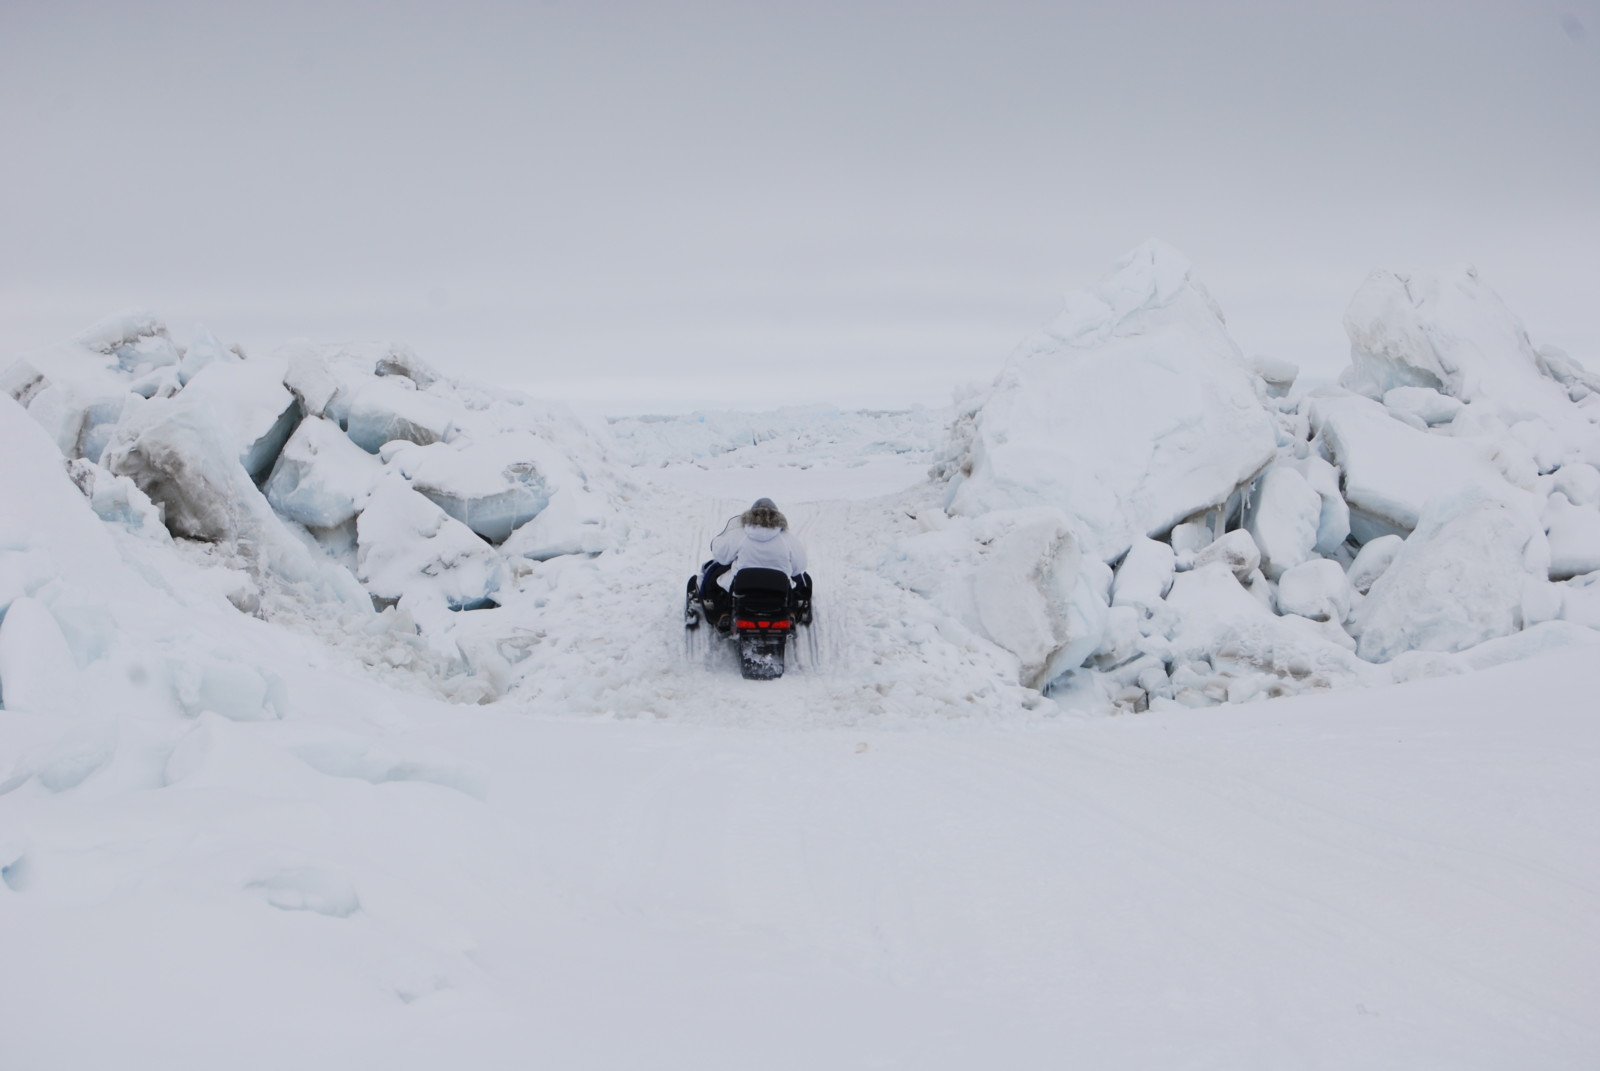 Person on snow machine drives up icy slope in wide ice landscape